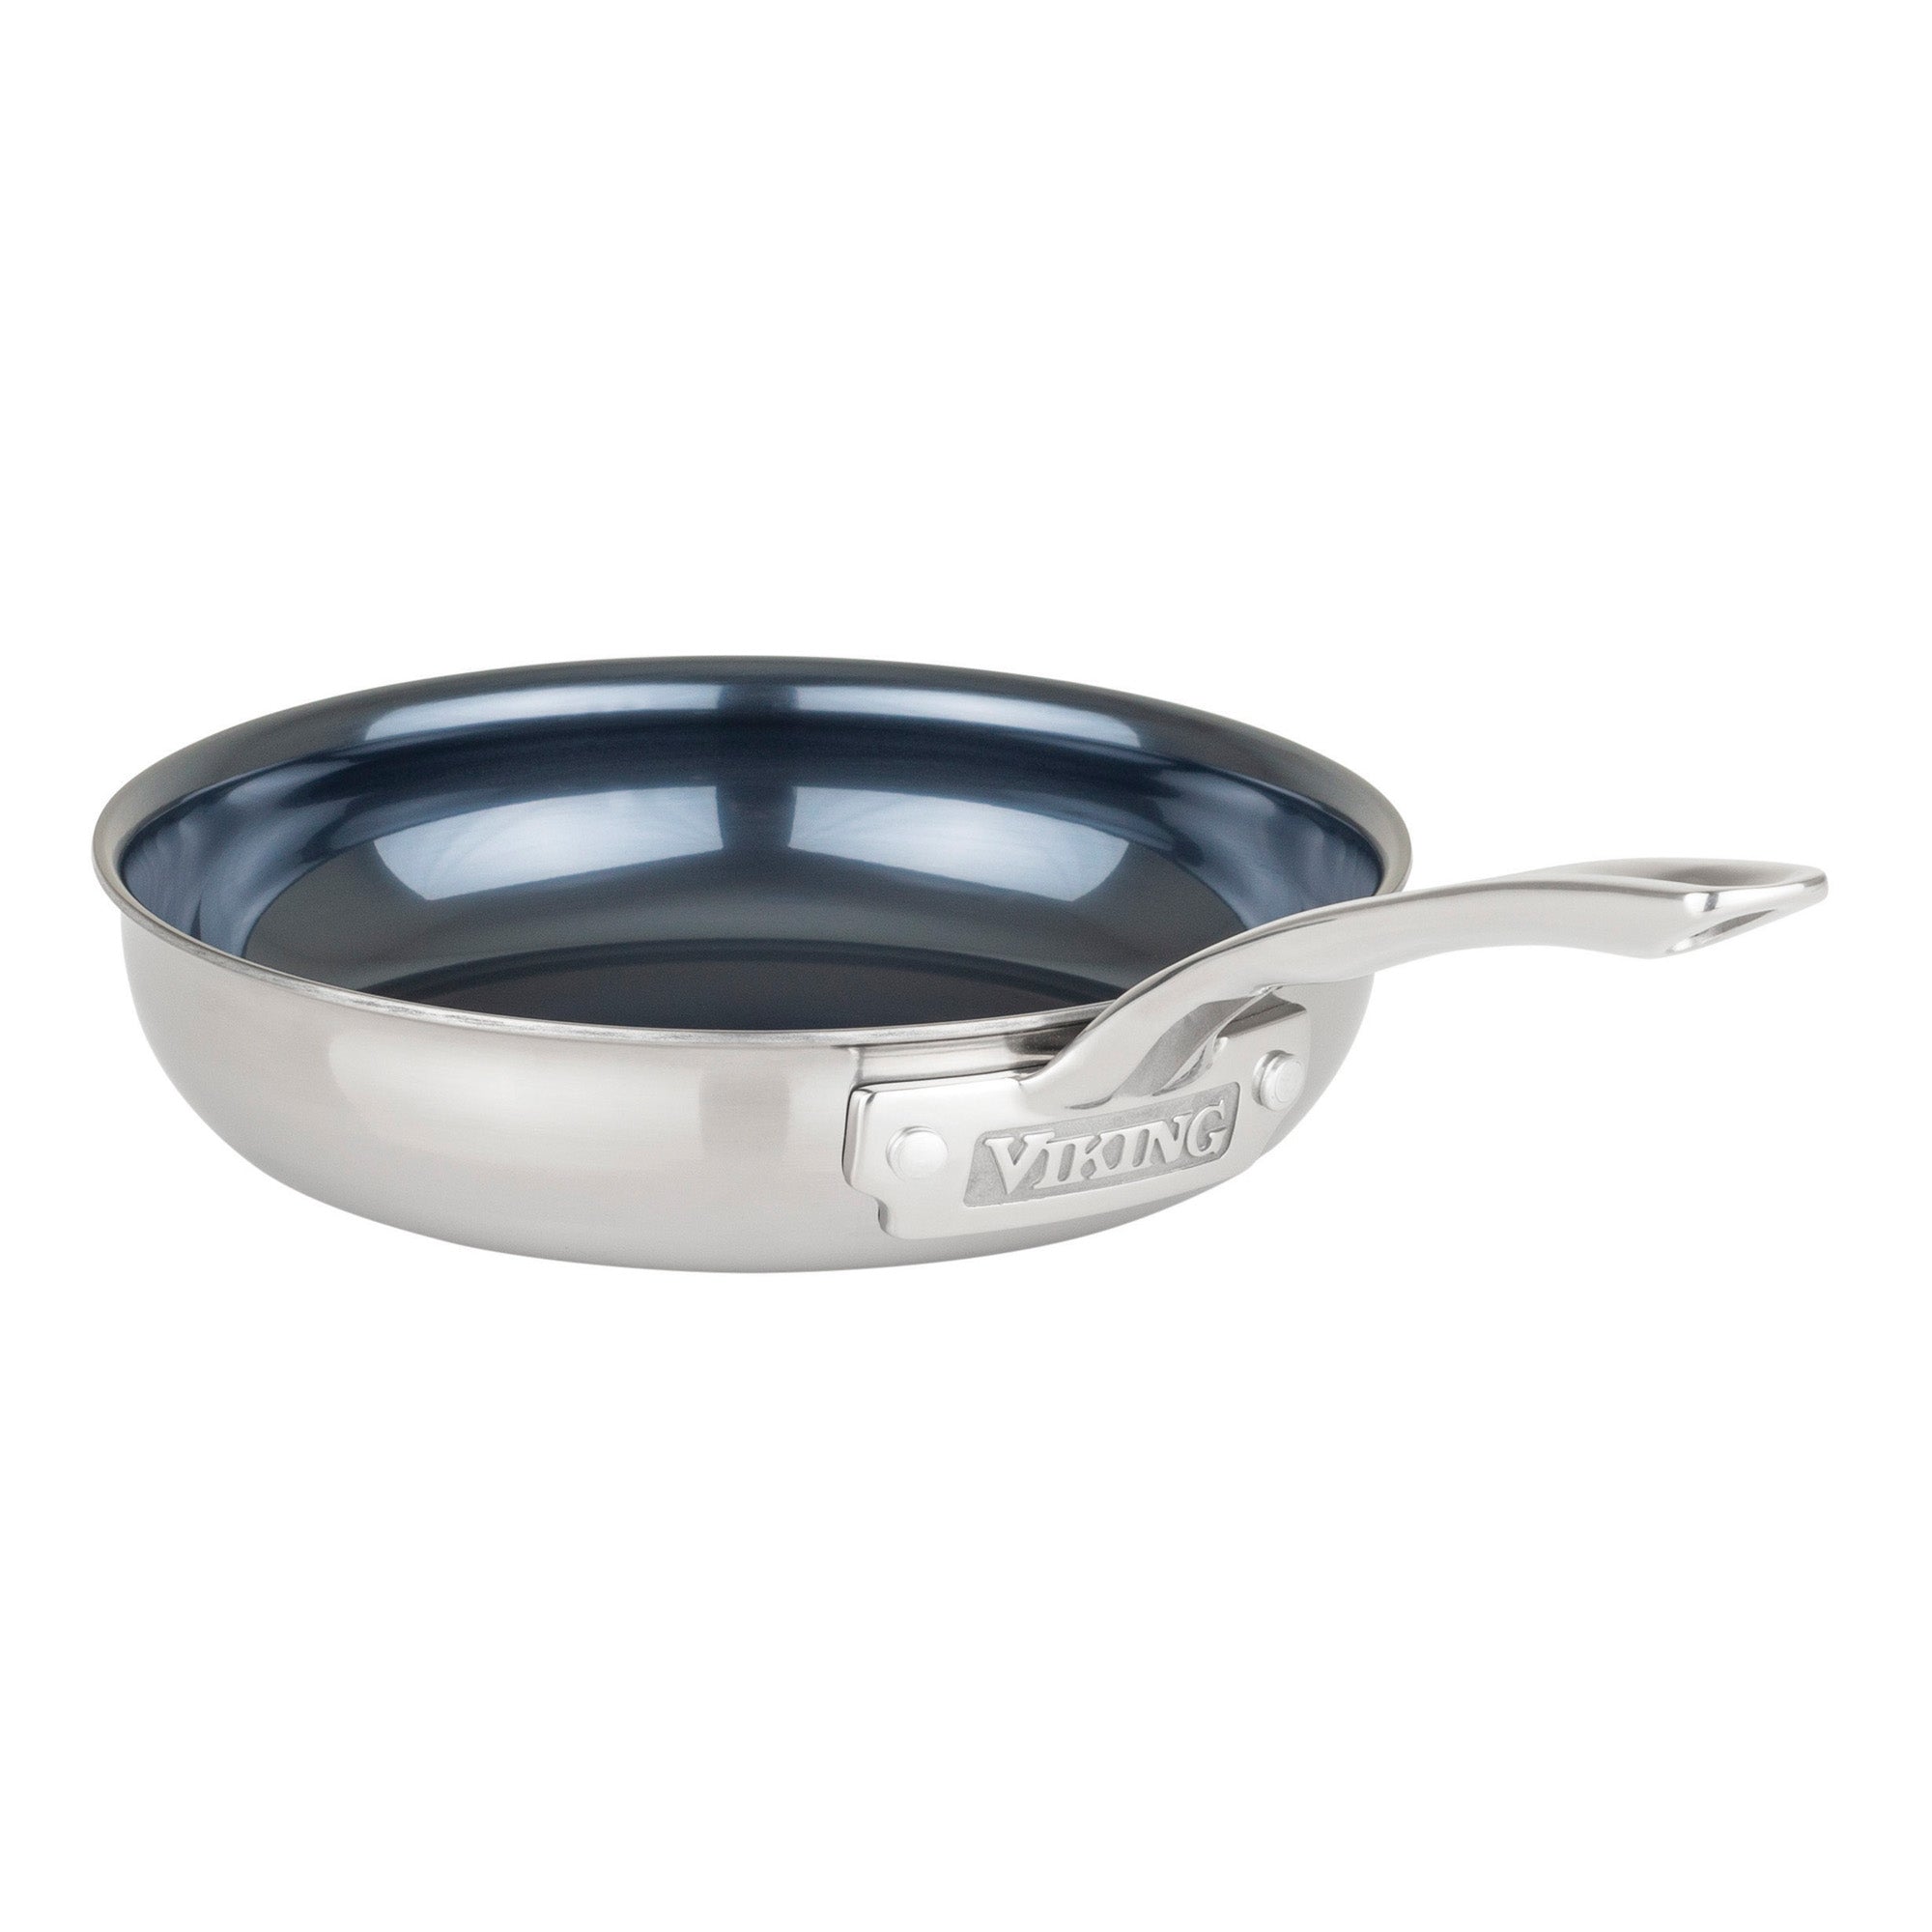  Viking Culinary Hard Anodized Nonstick Fry Pan, 8 inch